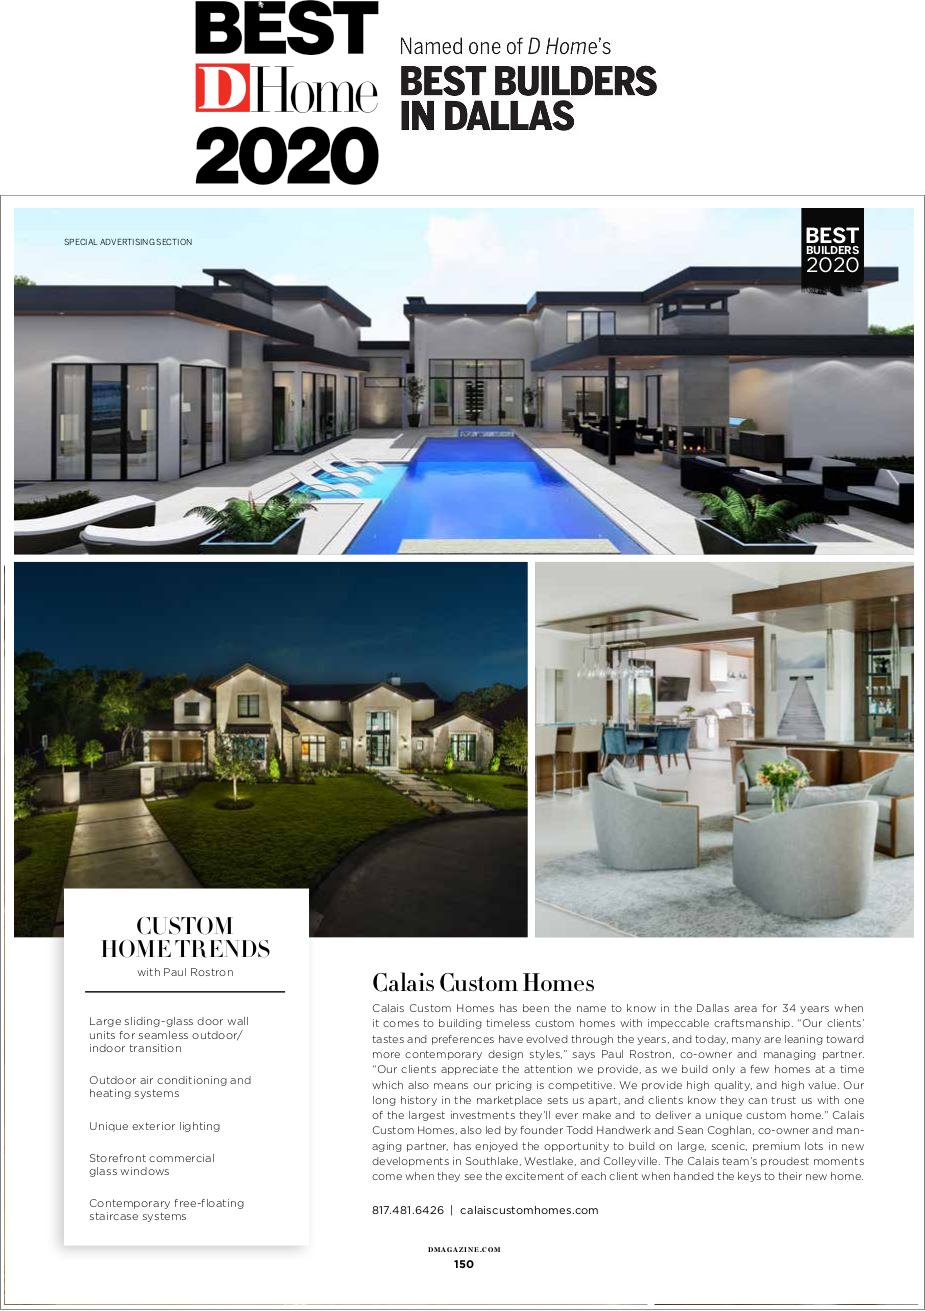 2020 DHome Best Builder Award Article